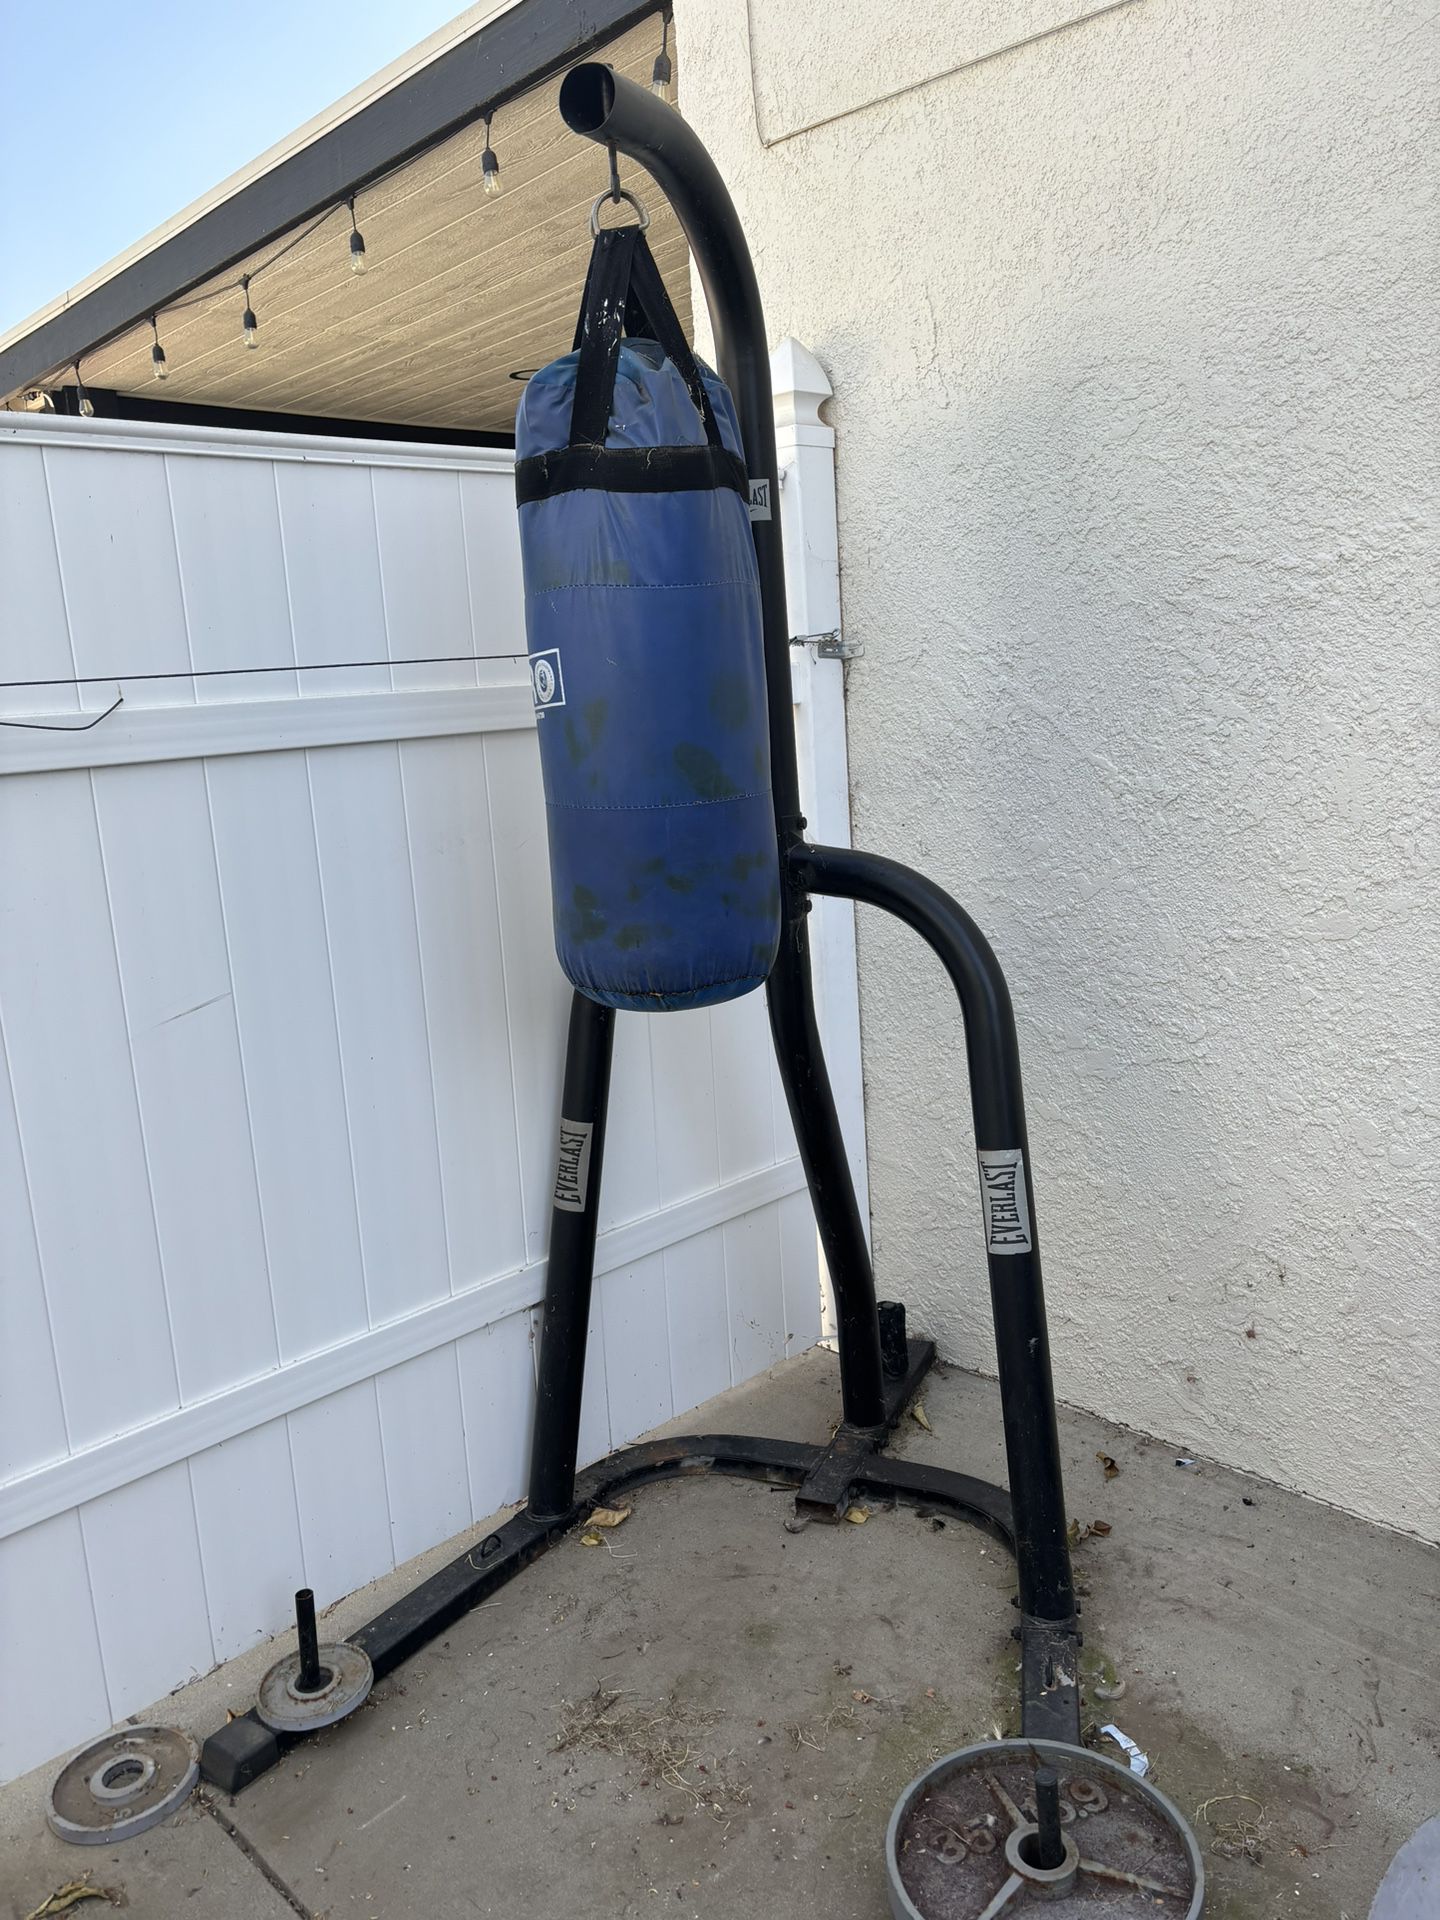 punching bag stand